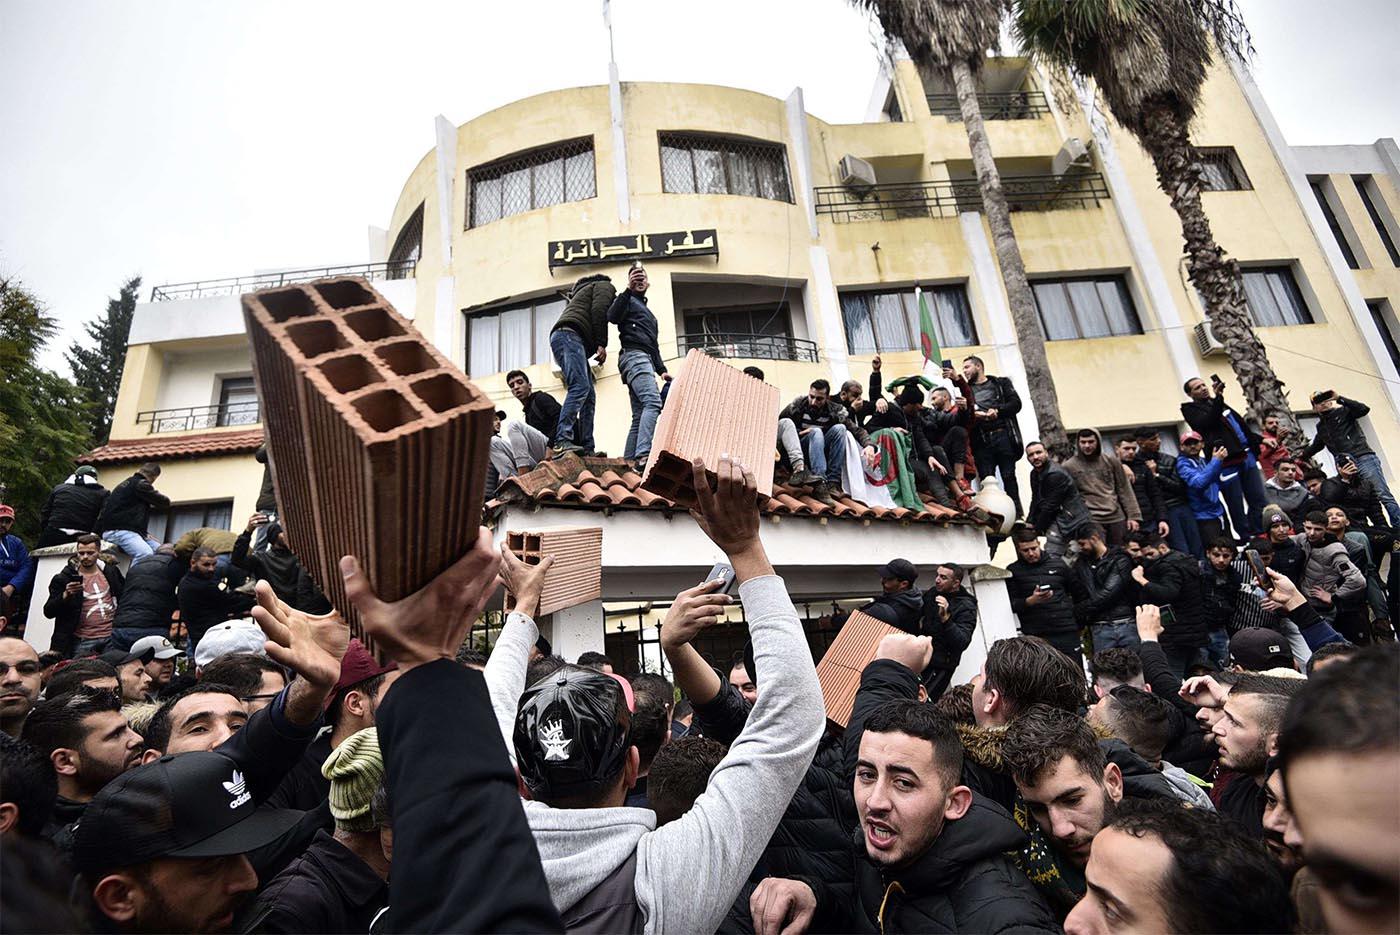 Algerian demonstrators carry bricks to build a wall at the entrance of the daira (sub-prefecture) of Tizi-Ouzou